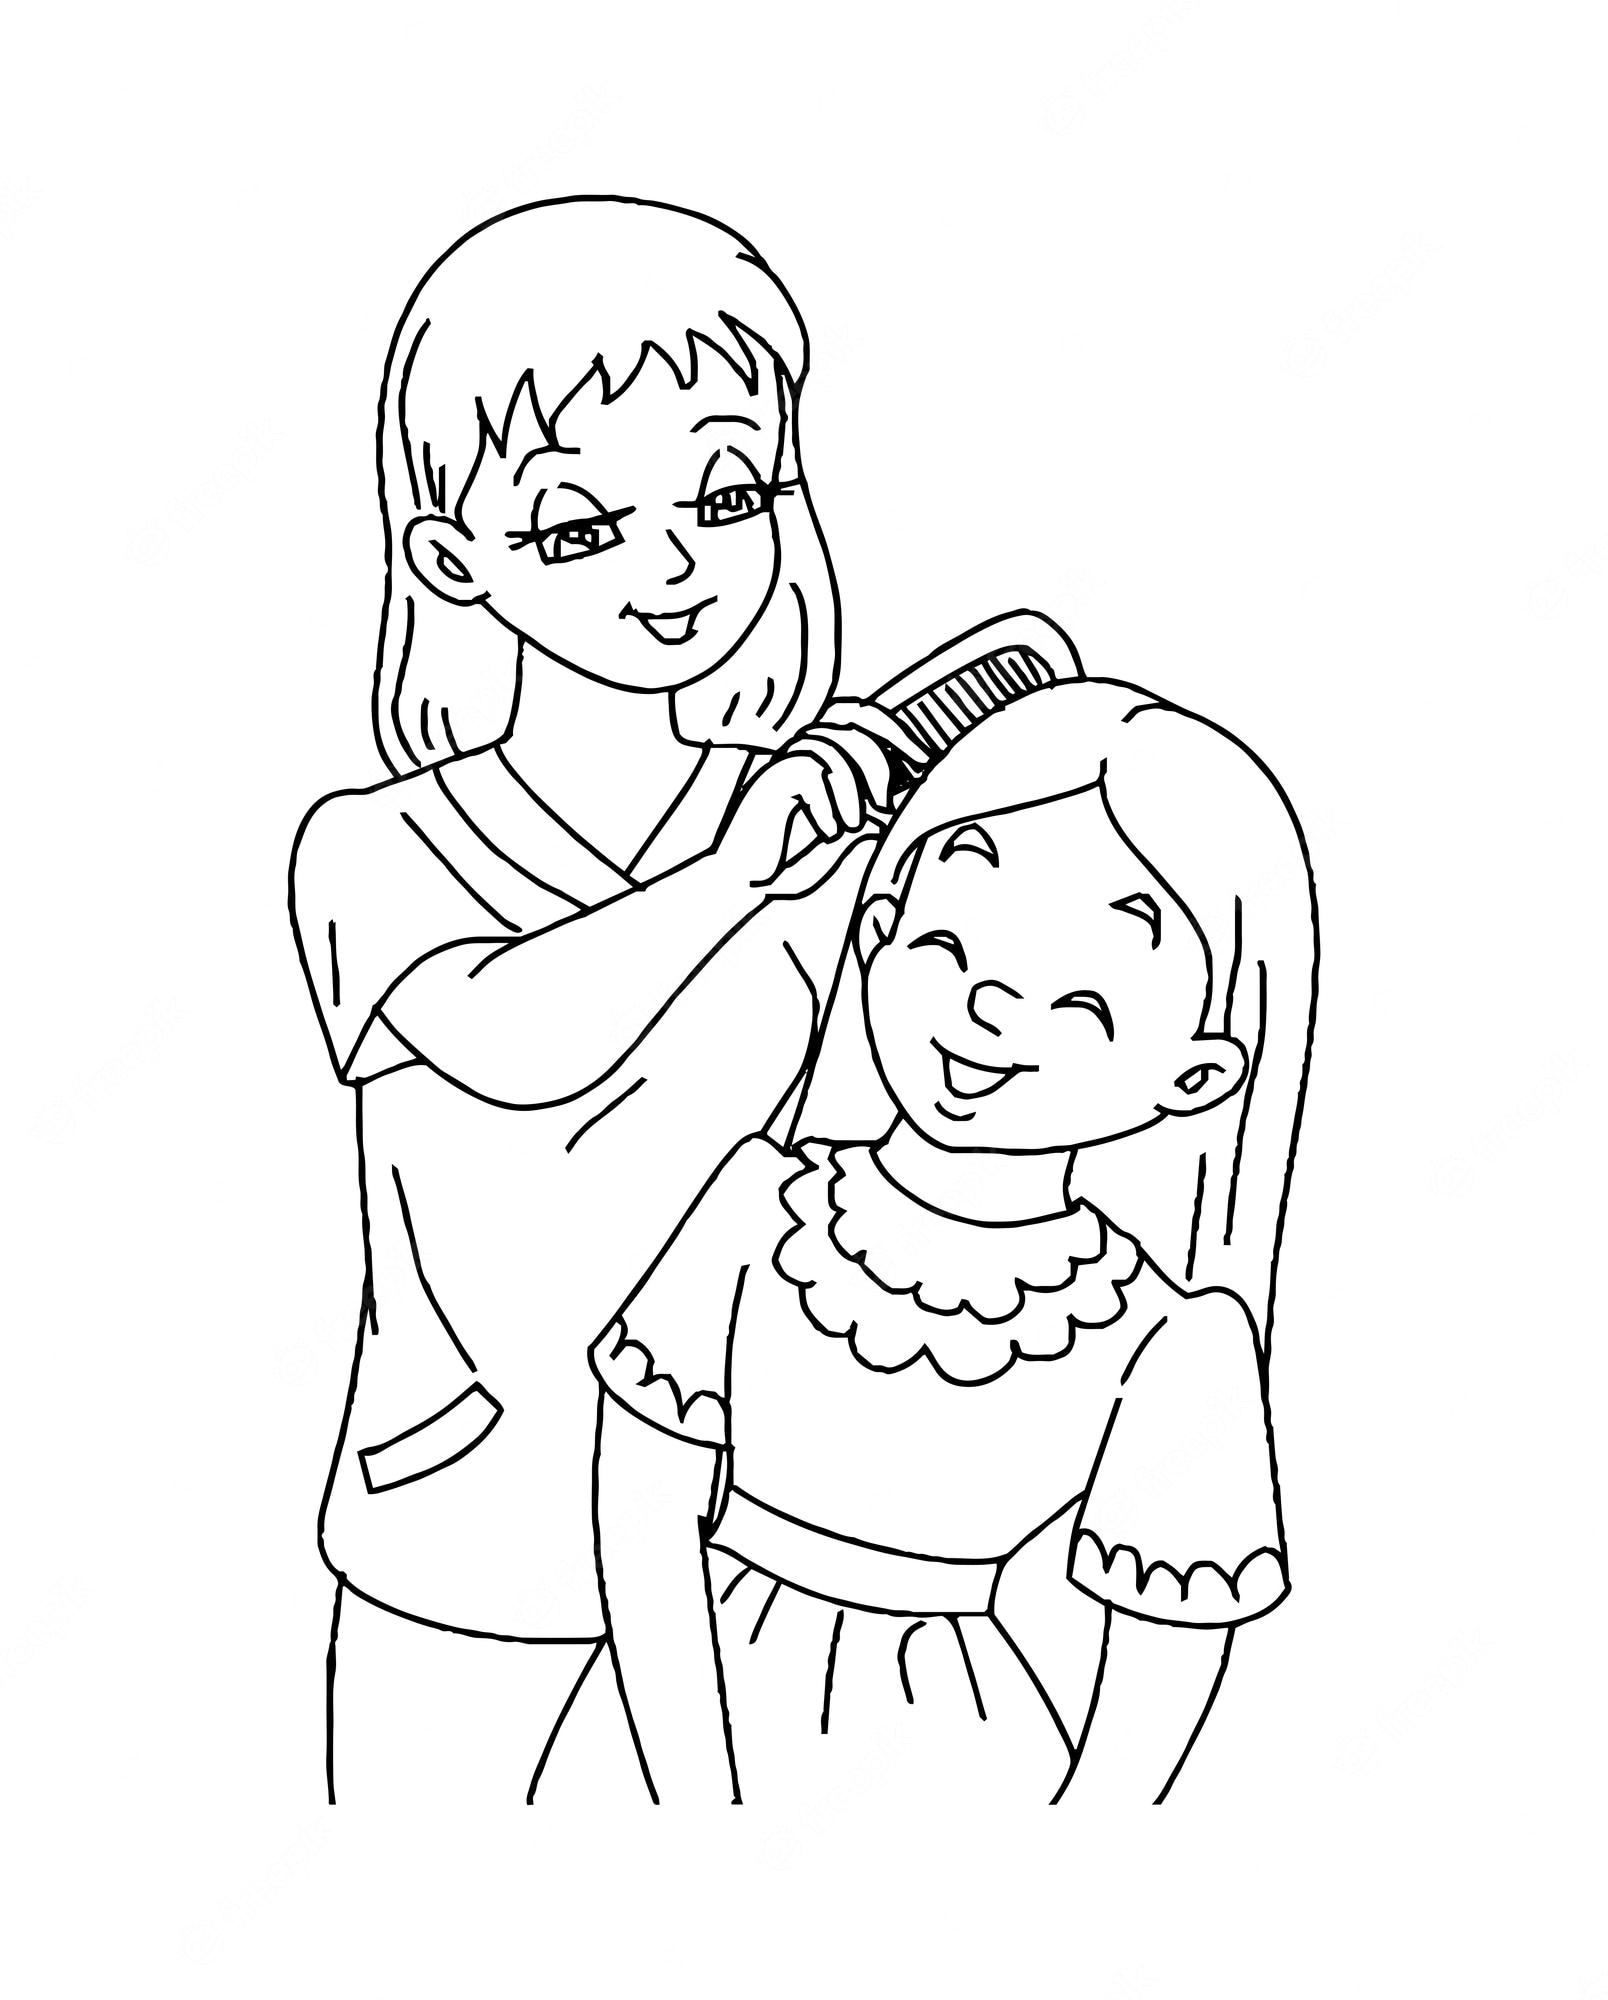 Premium Vector. Mother's Day Coloring Page For Kids - Coloring Nation